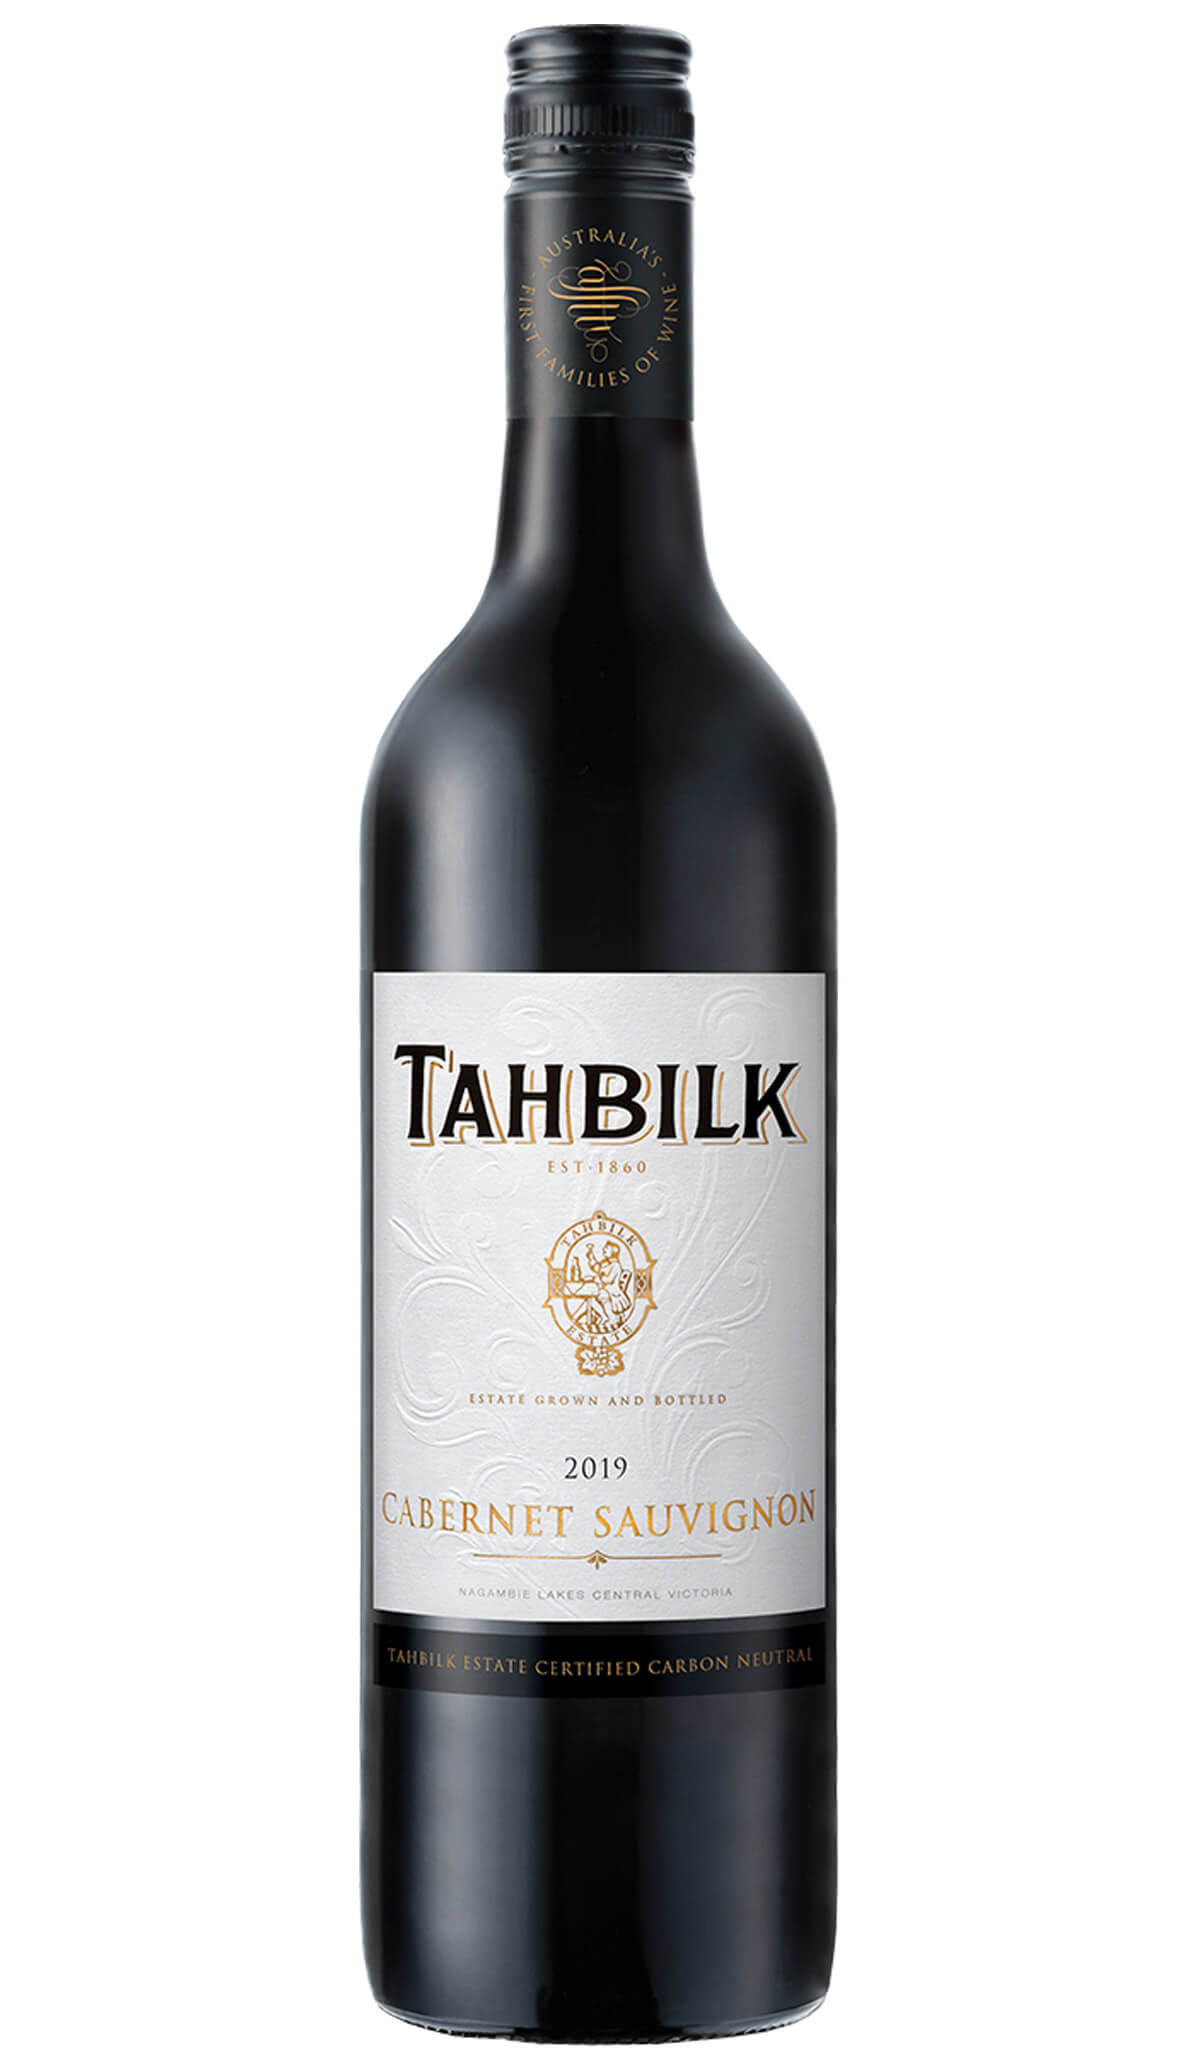 Find out more or buy Tahbilk Cabernet Sauvignon 2019 (Nagambie) online at Wine Sellers Direct - Australia’s independent liquor specialists.